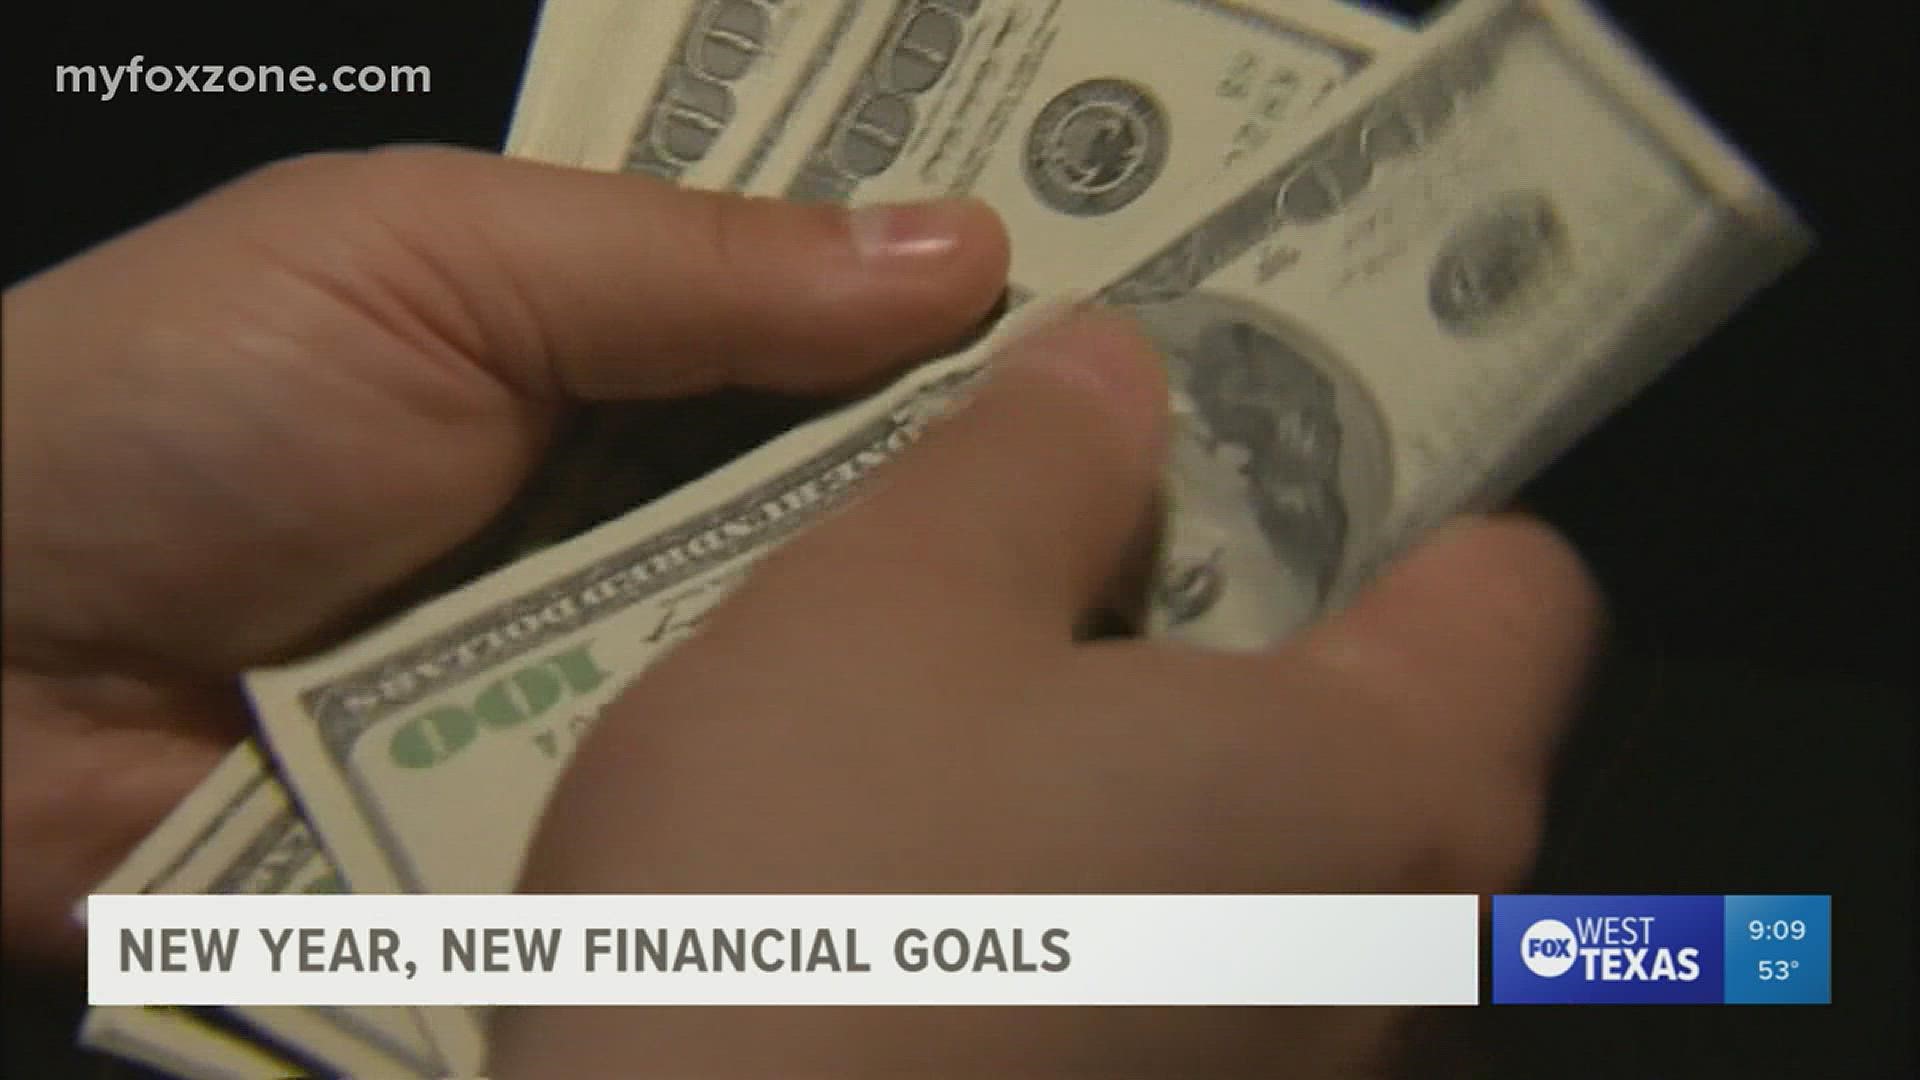 As we gear up for the new year, saving money is at the top of many people's resolution list.